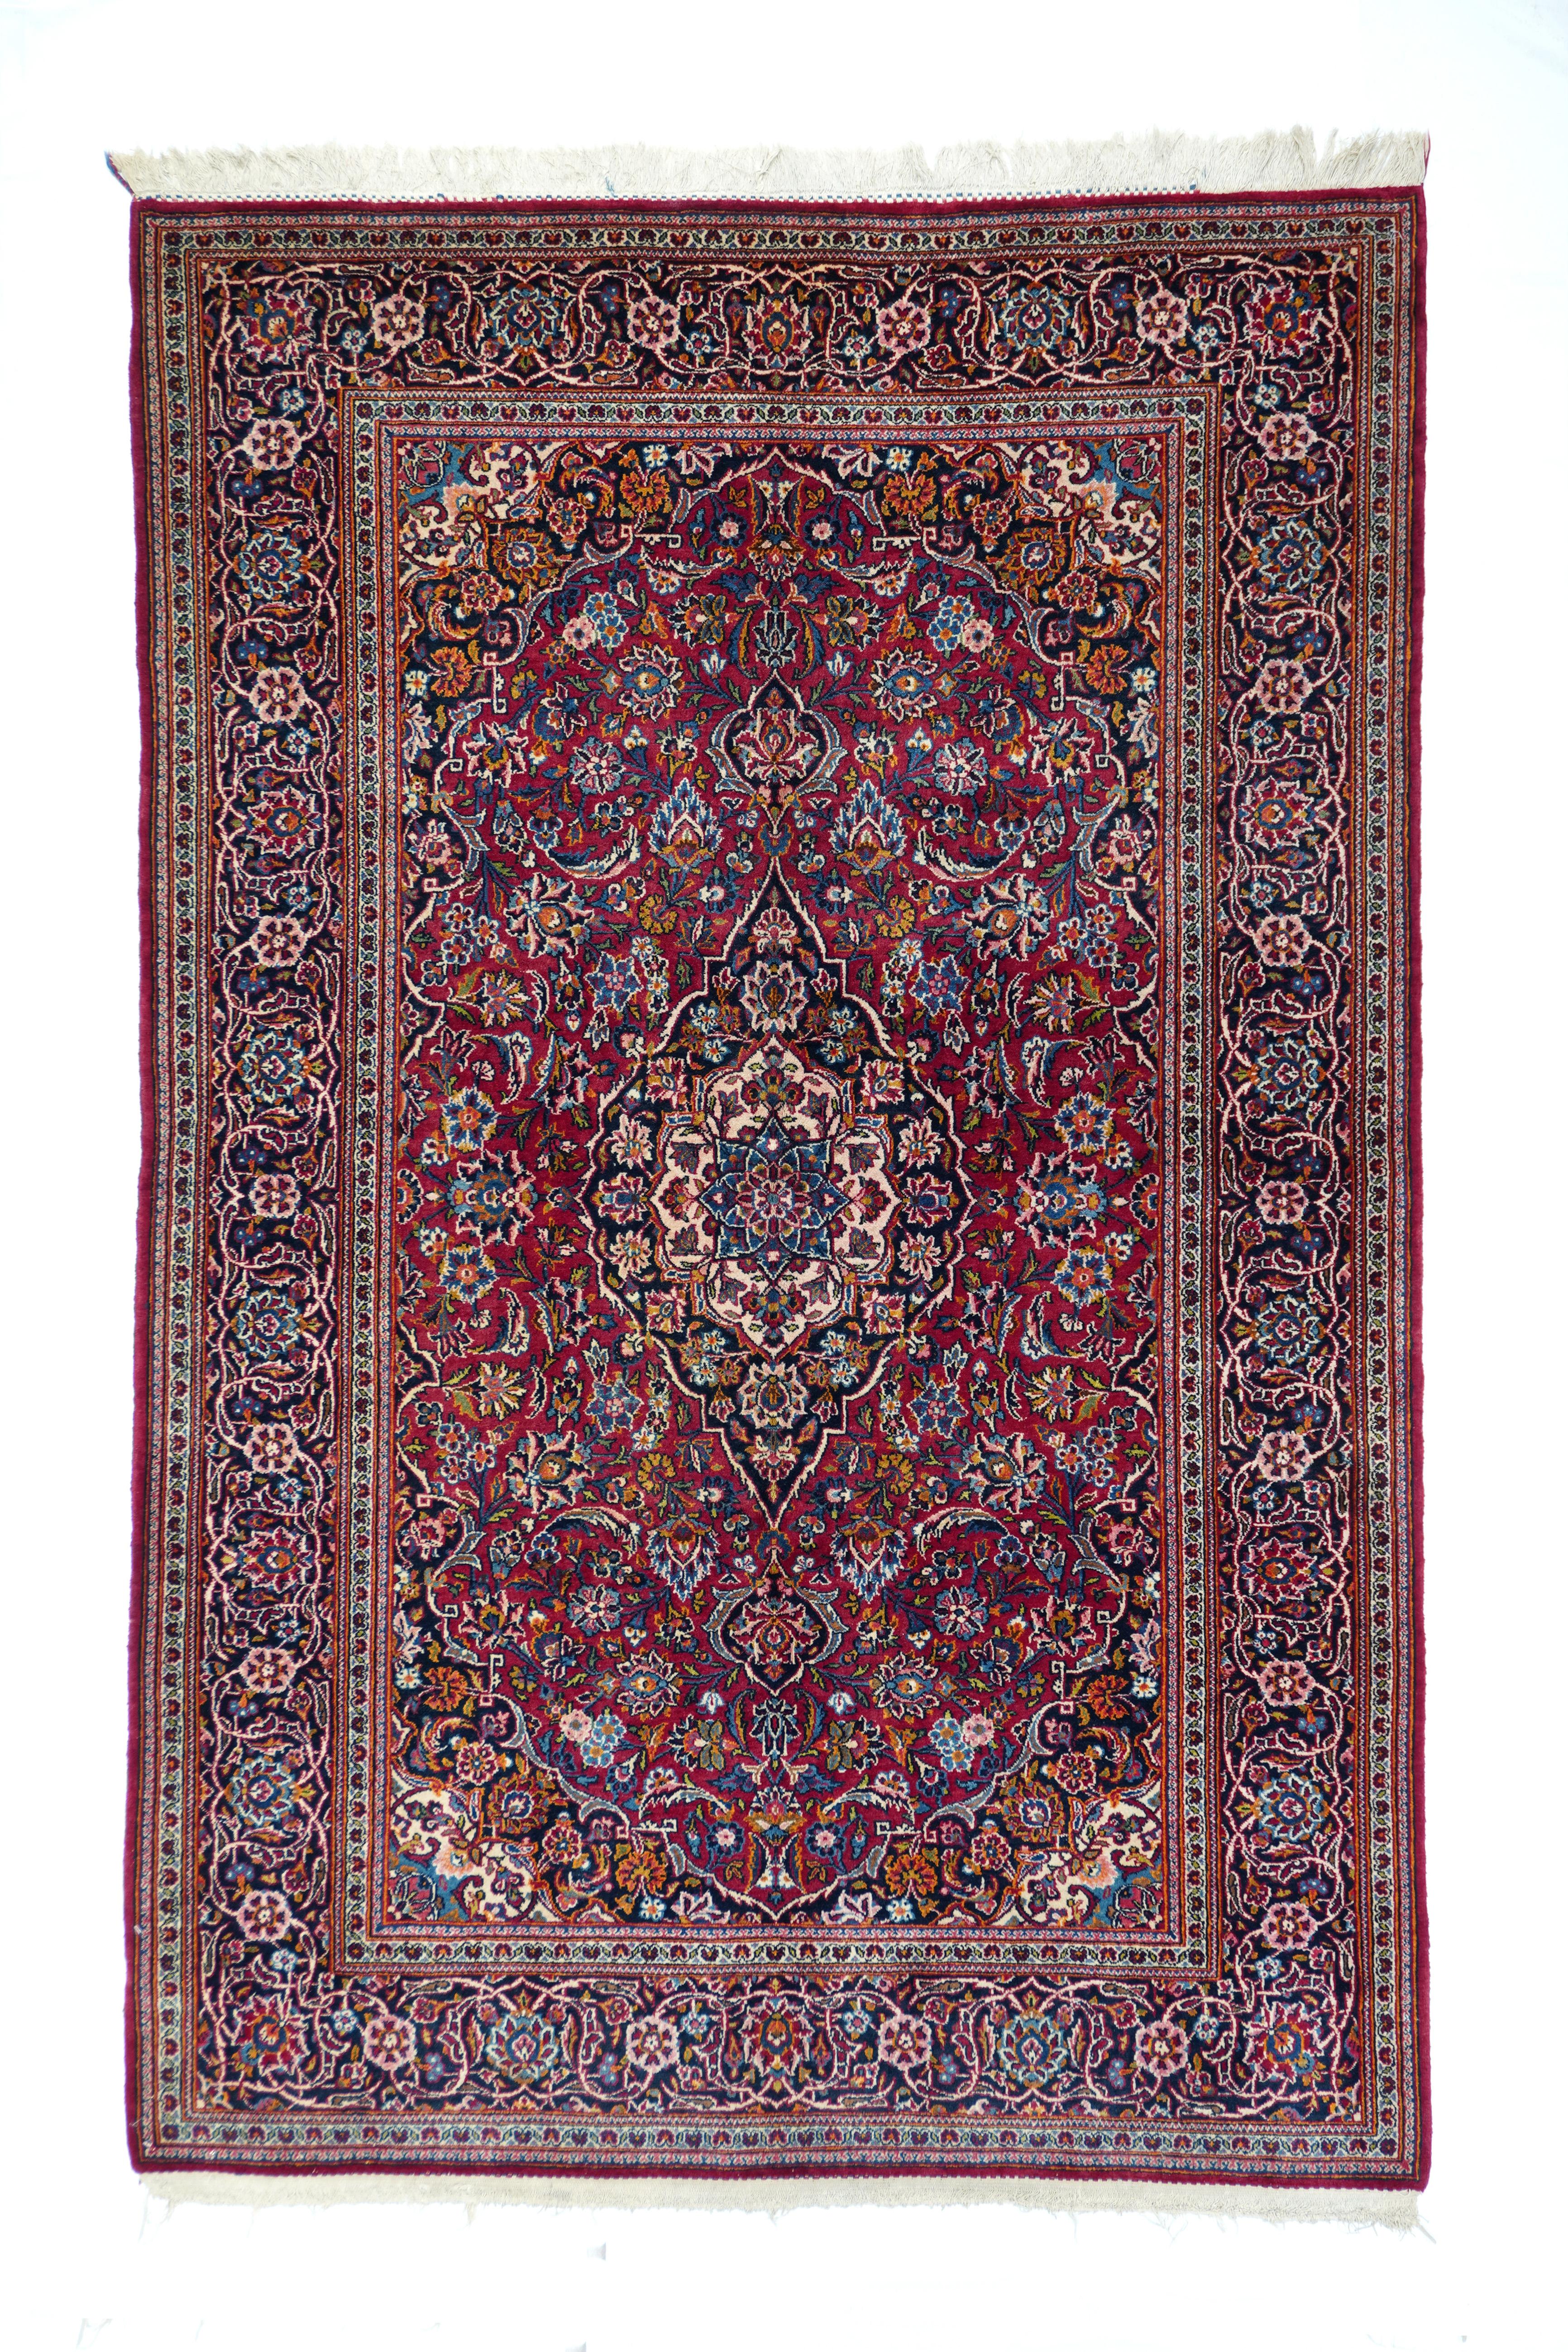 Antique Kashan carpets are among the finest Persian rugs. They are woven in workshops of the city of Kashan, in north central Iran. Kashan was a hub of silk production since the Safavid dynasty, and has created some of the highest quality Persian